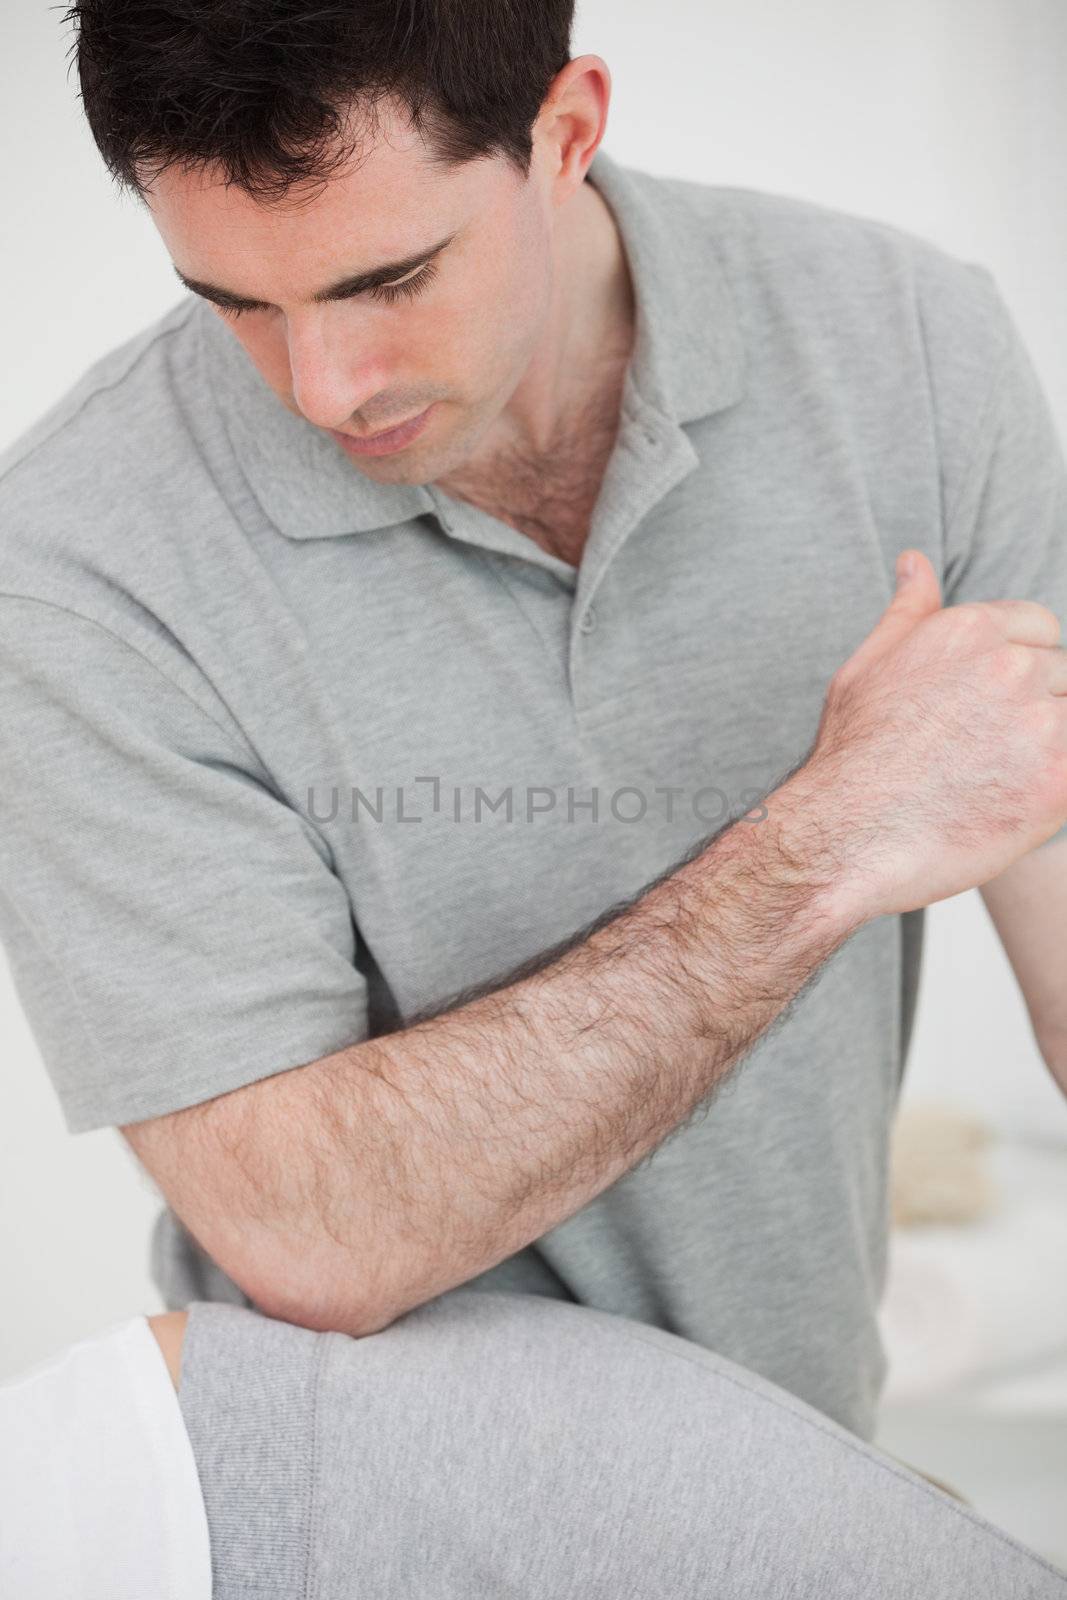 Physiotherapist using his elbow on the hip of a woman in a room